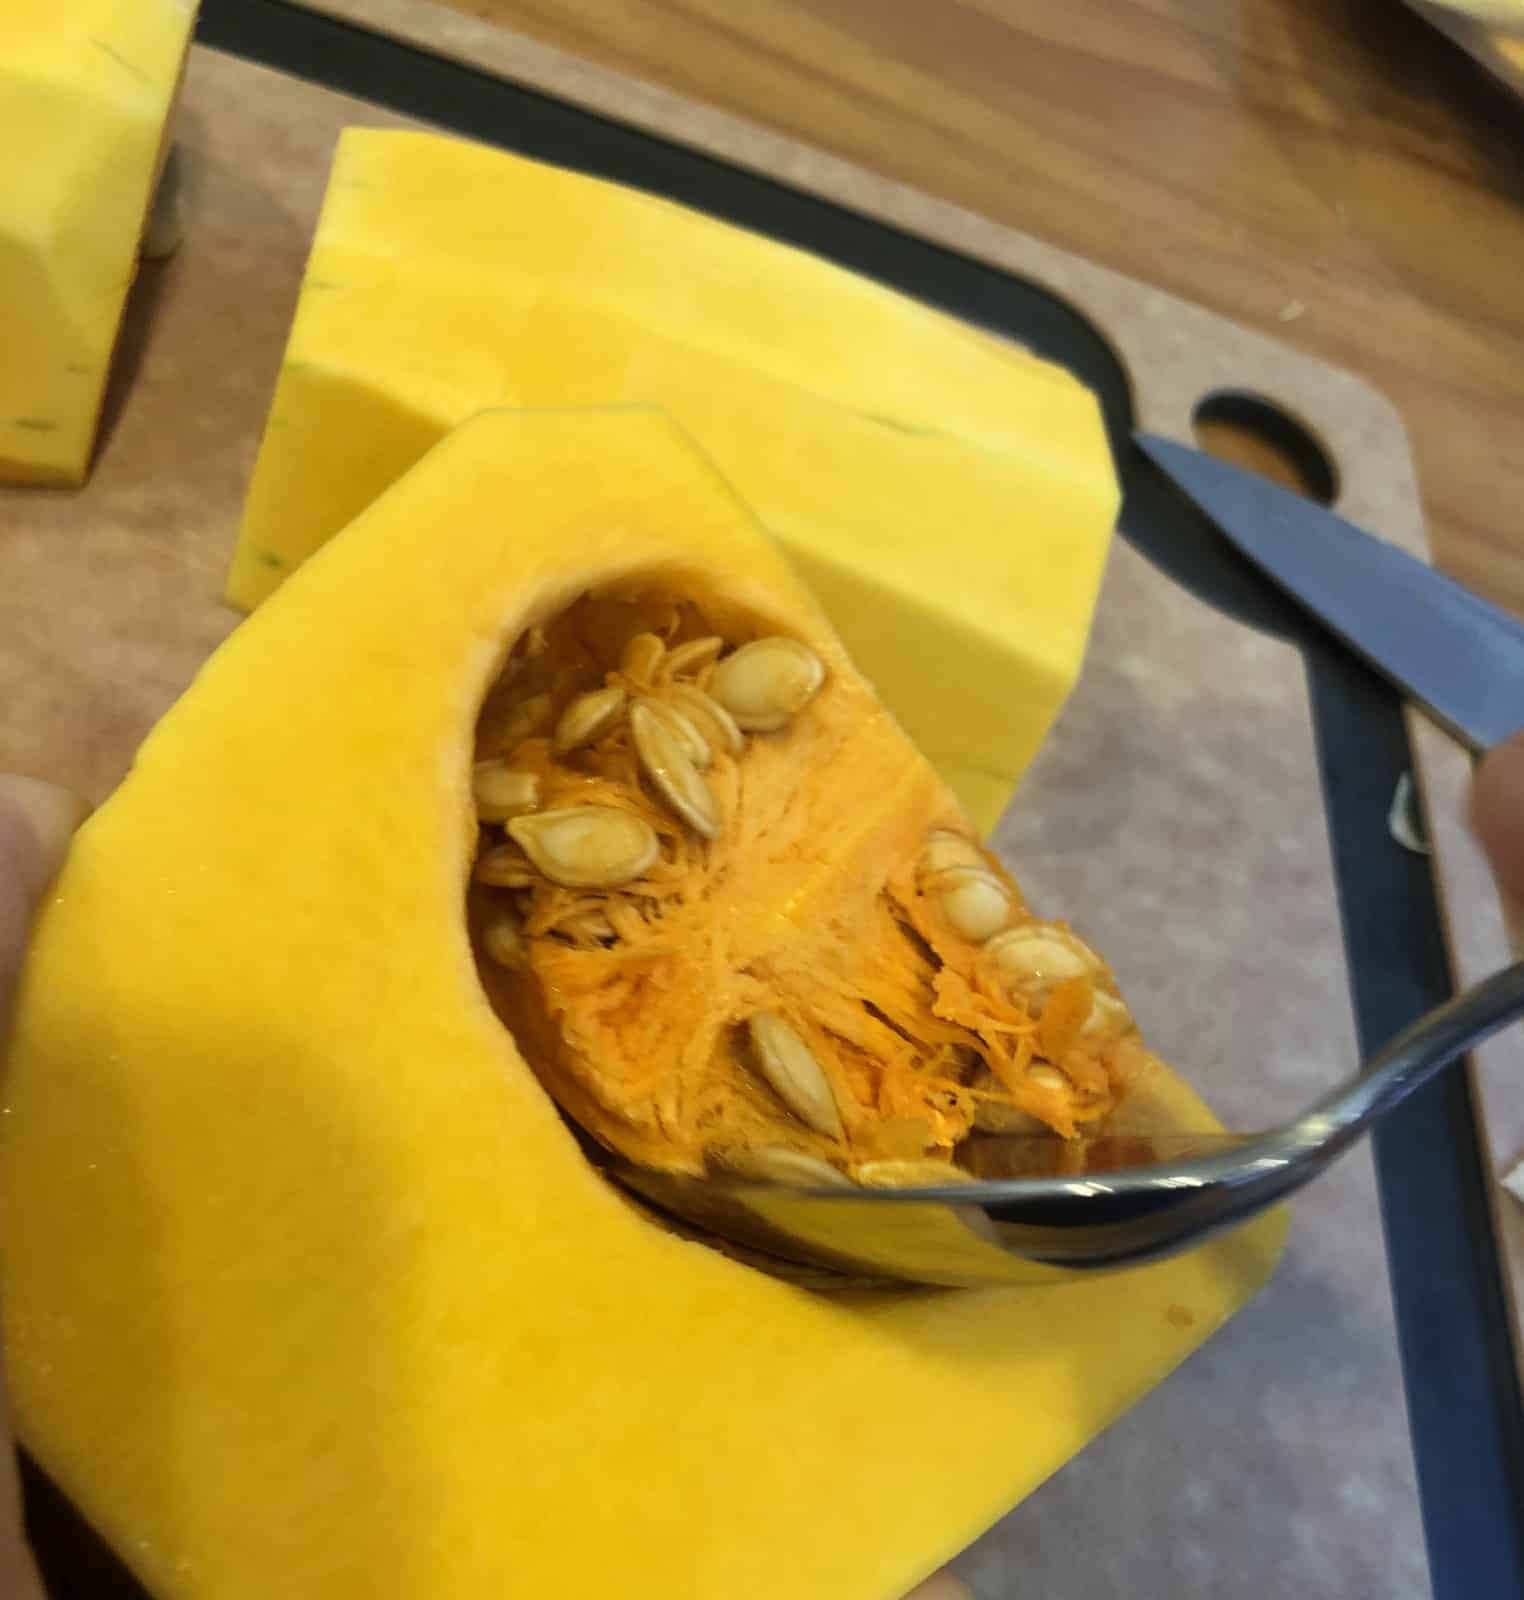 removing seeds from butternut squash with a spoon